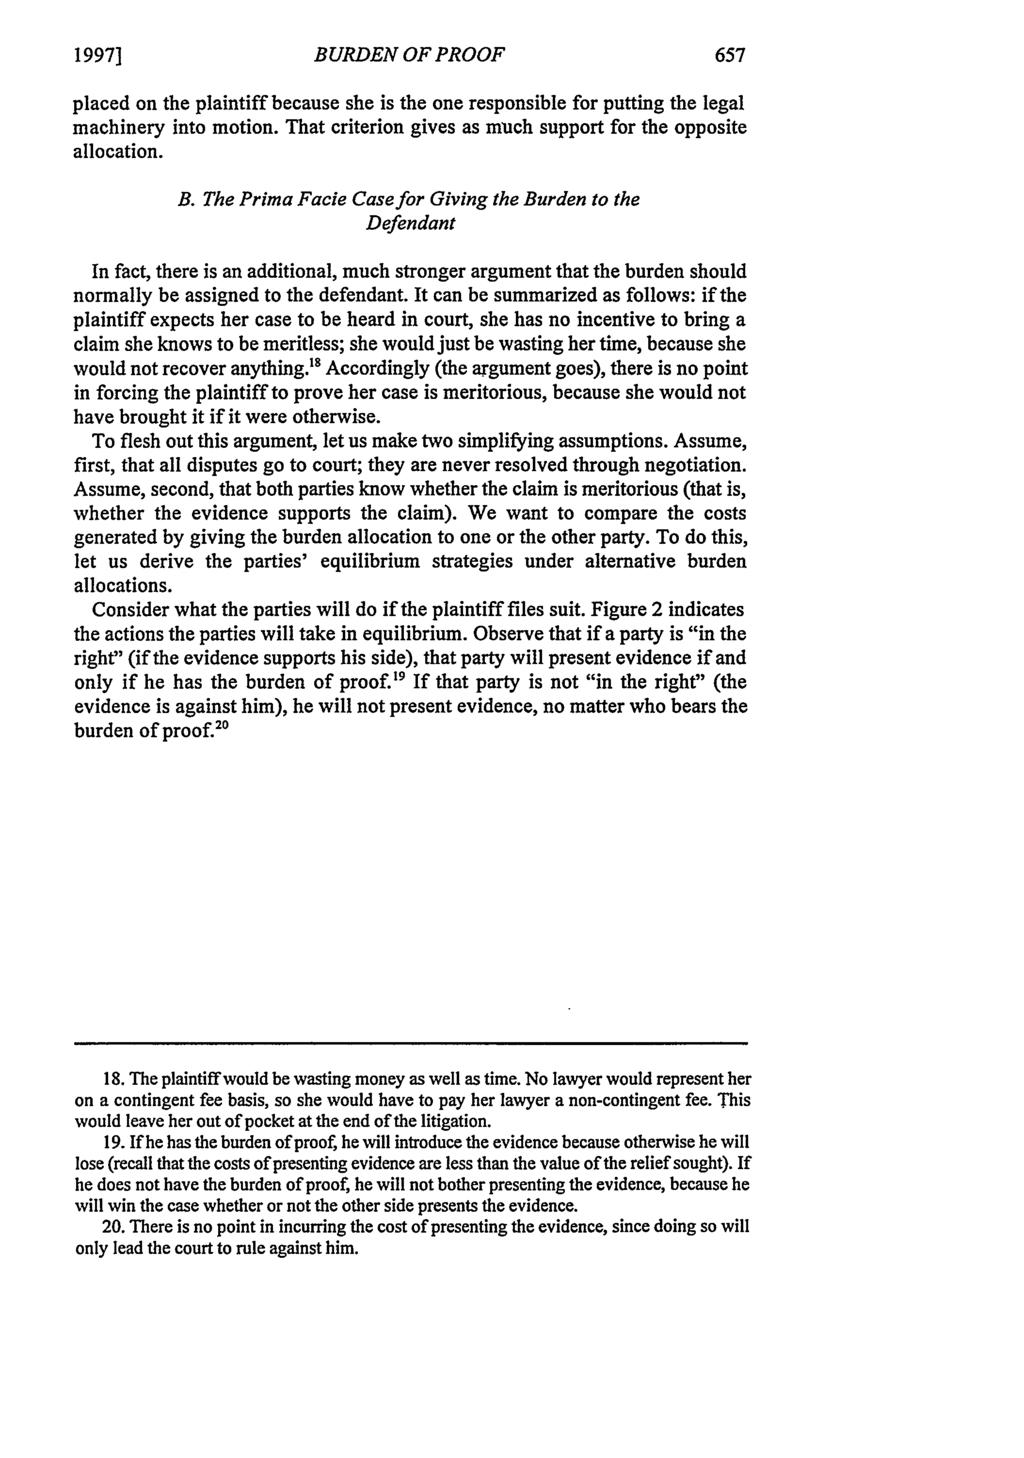 1997] BURDEN OF PROOF placed on the plaintiff because she is the one responsible for putting the legal machinery into motion. That criterion gives as much support for the opposite allocation. B. The Prima Facie Case for Giving the Burden to the Defendant In fact, there is an additional, much stronger argument that the burden should normally be assigned to the defendant.